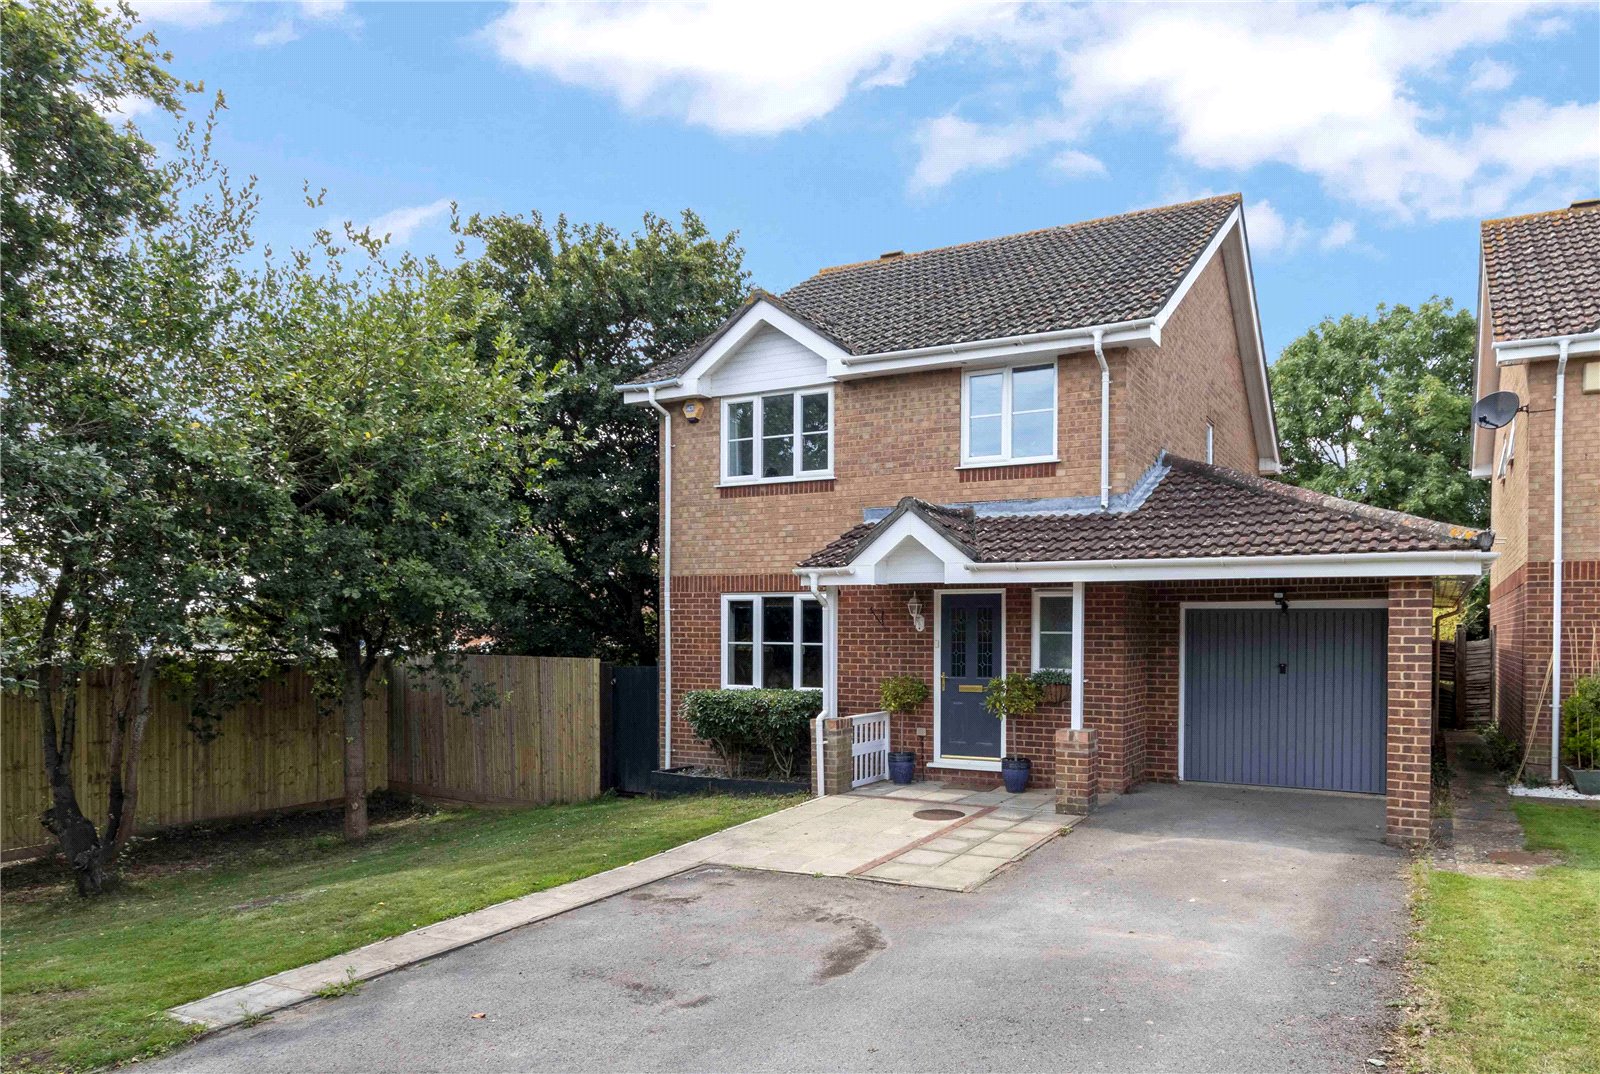 4 bed house for sale in Fontwell Close, Fontwell - Property Image 1